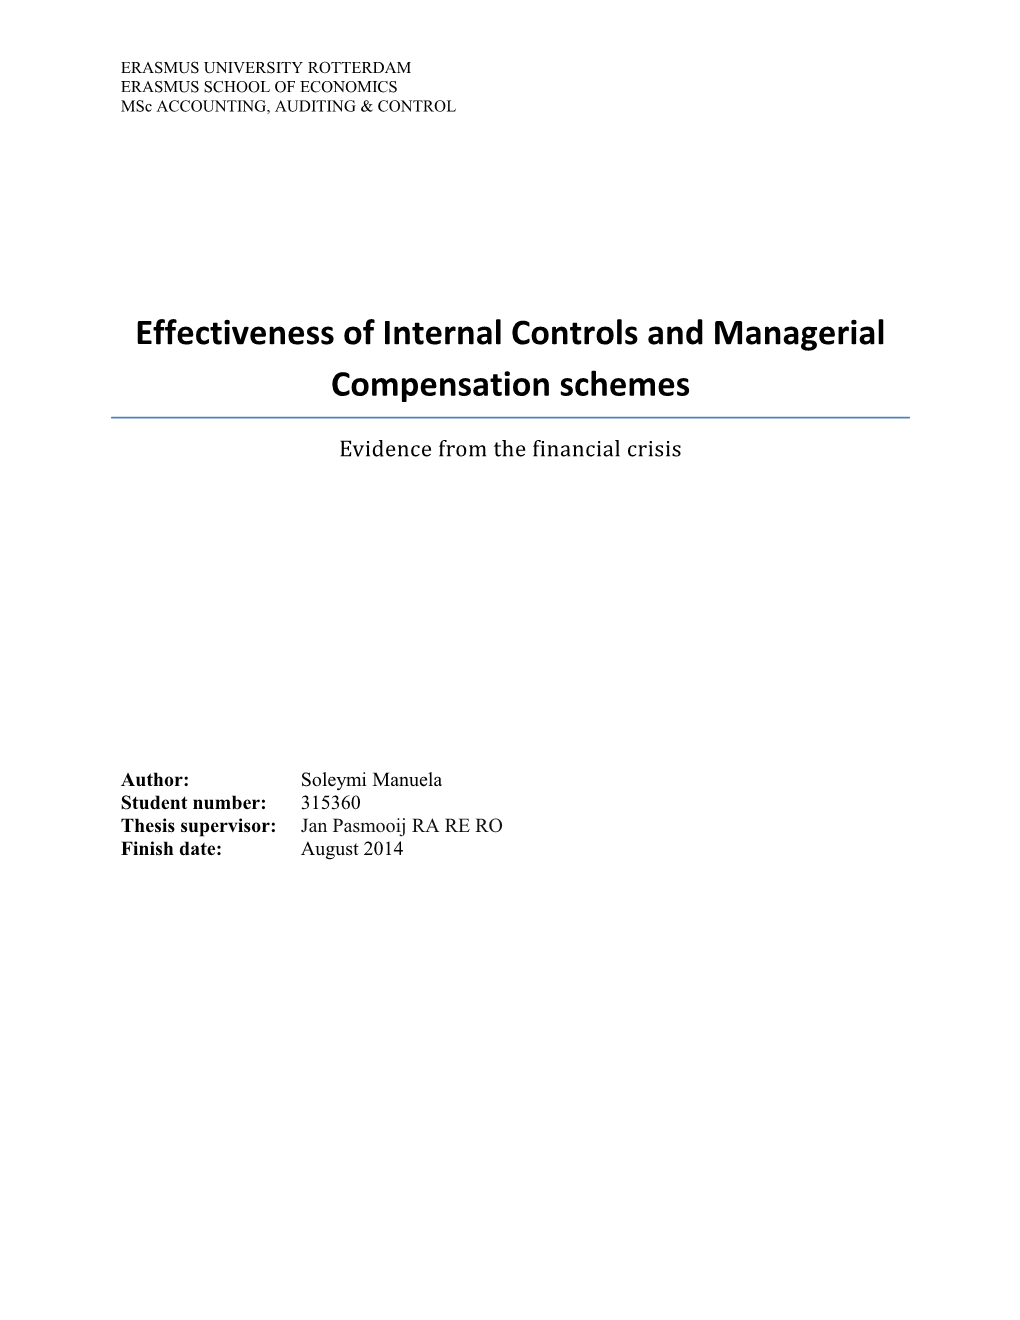 Effectiveness of Internal Controls and Managerial Compensation Schemes